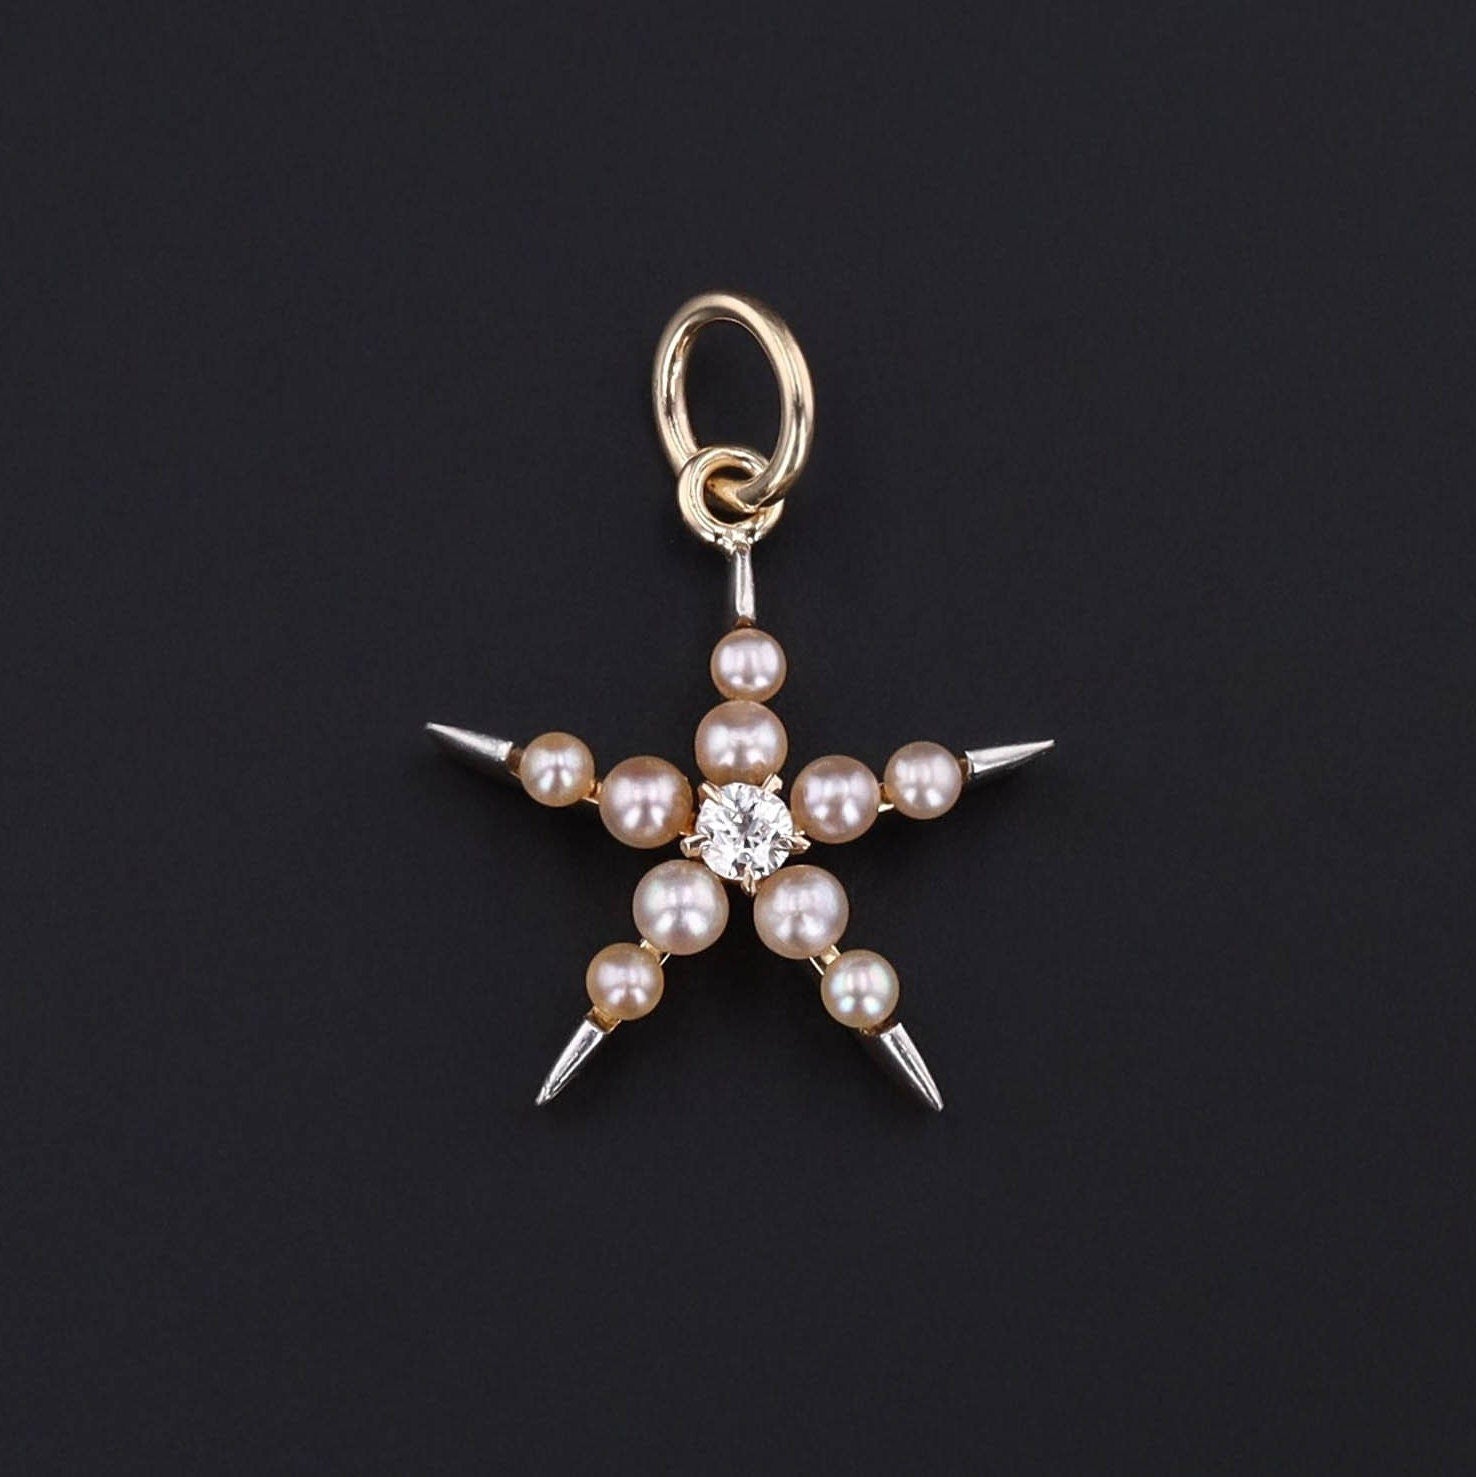 Antique Pearl Star Conversion Charm of 14k Gold and Platinum